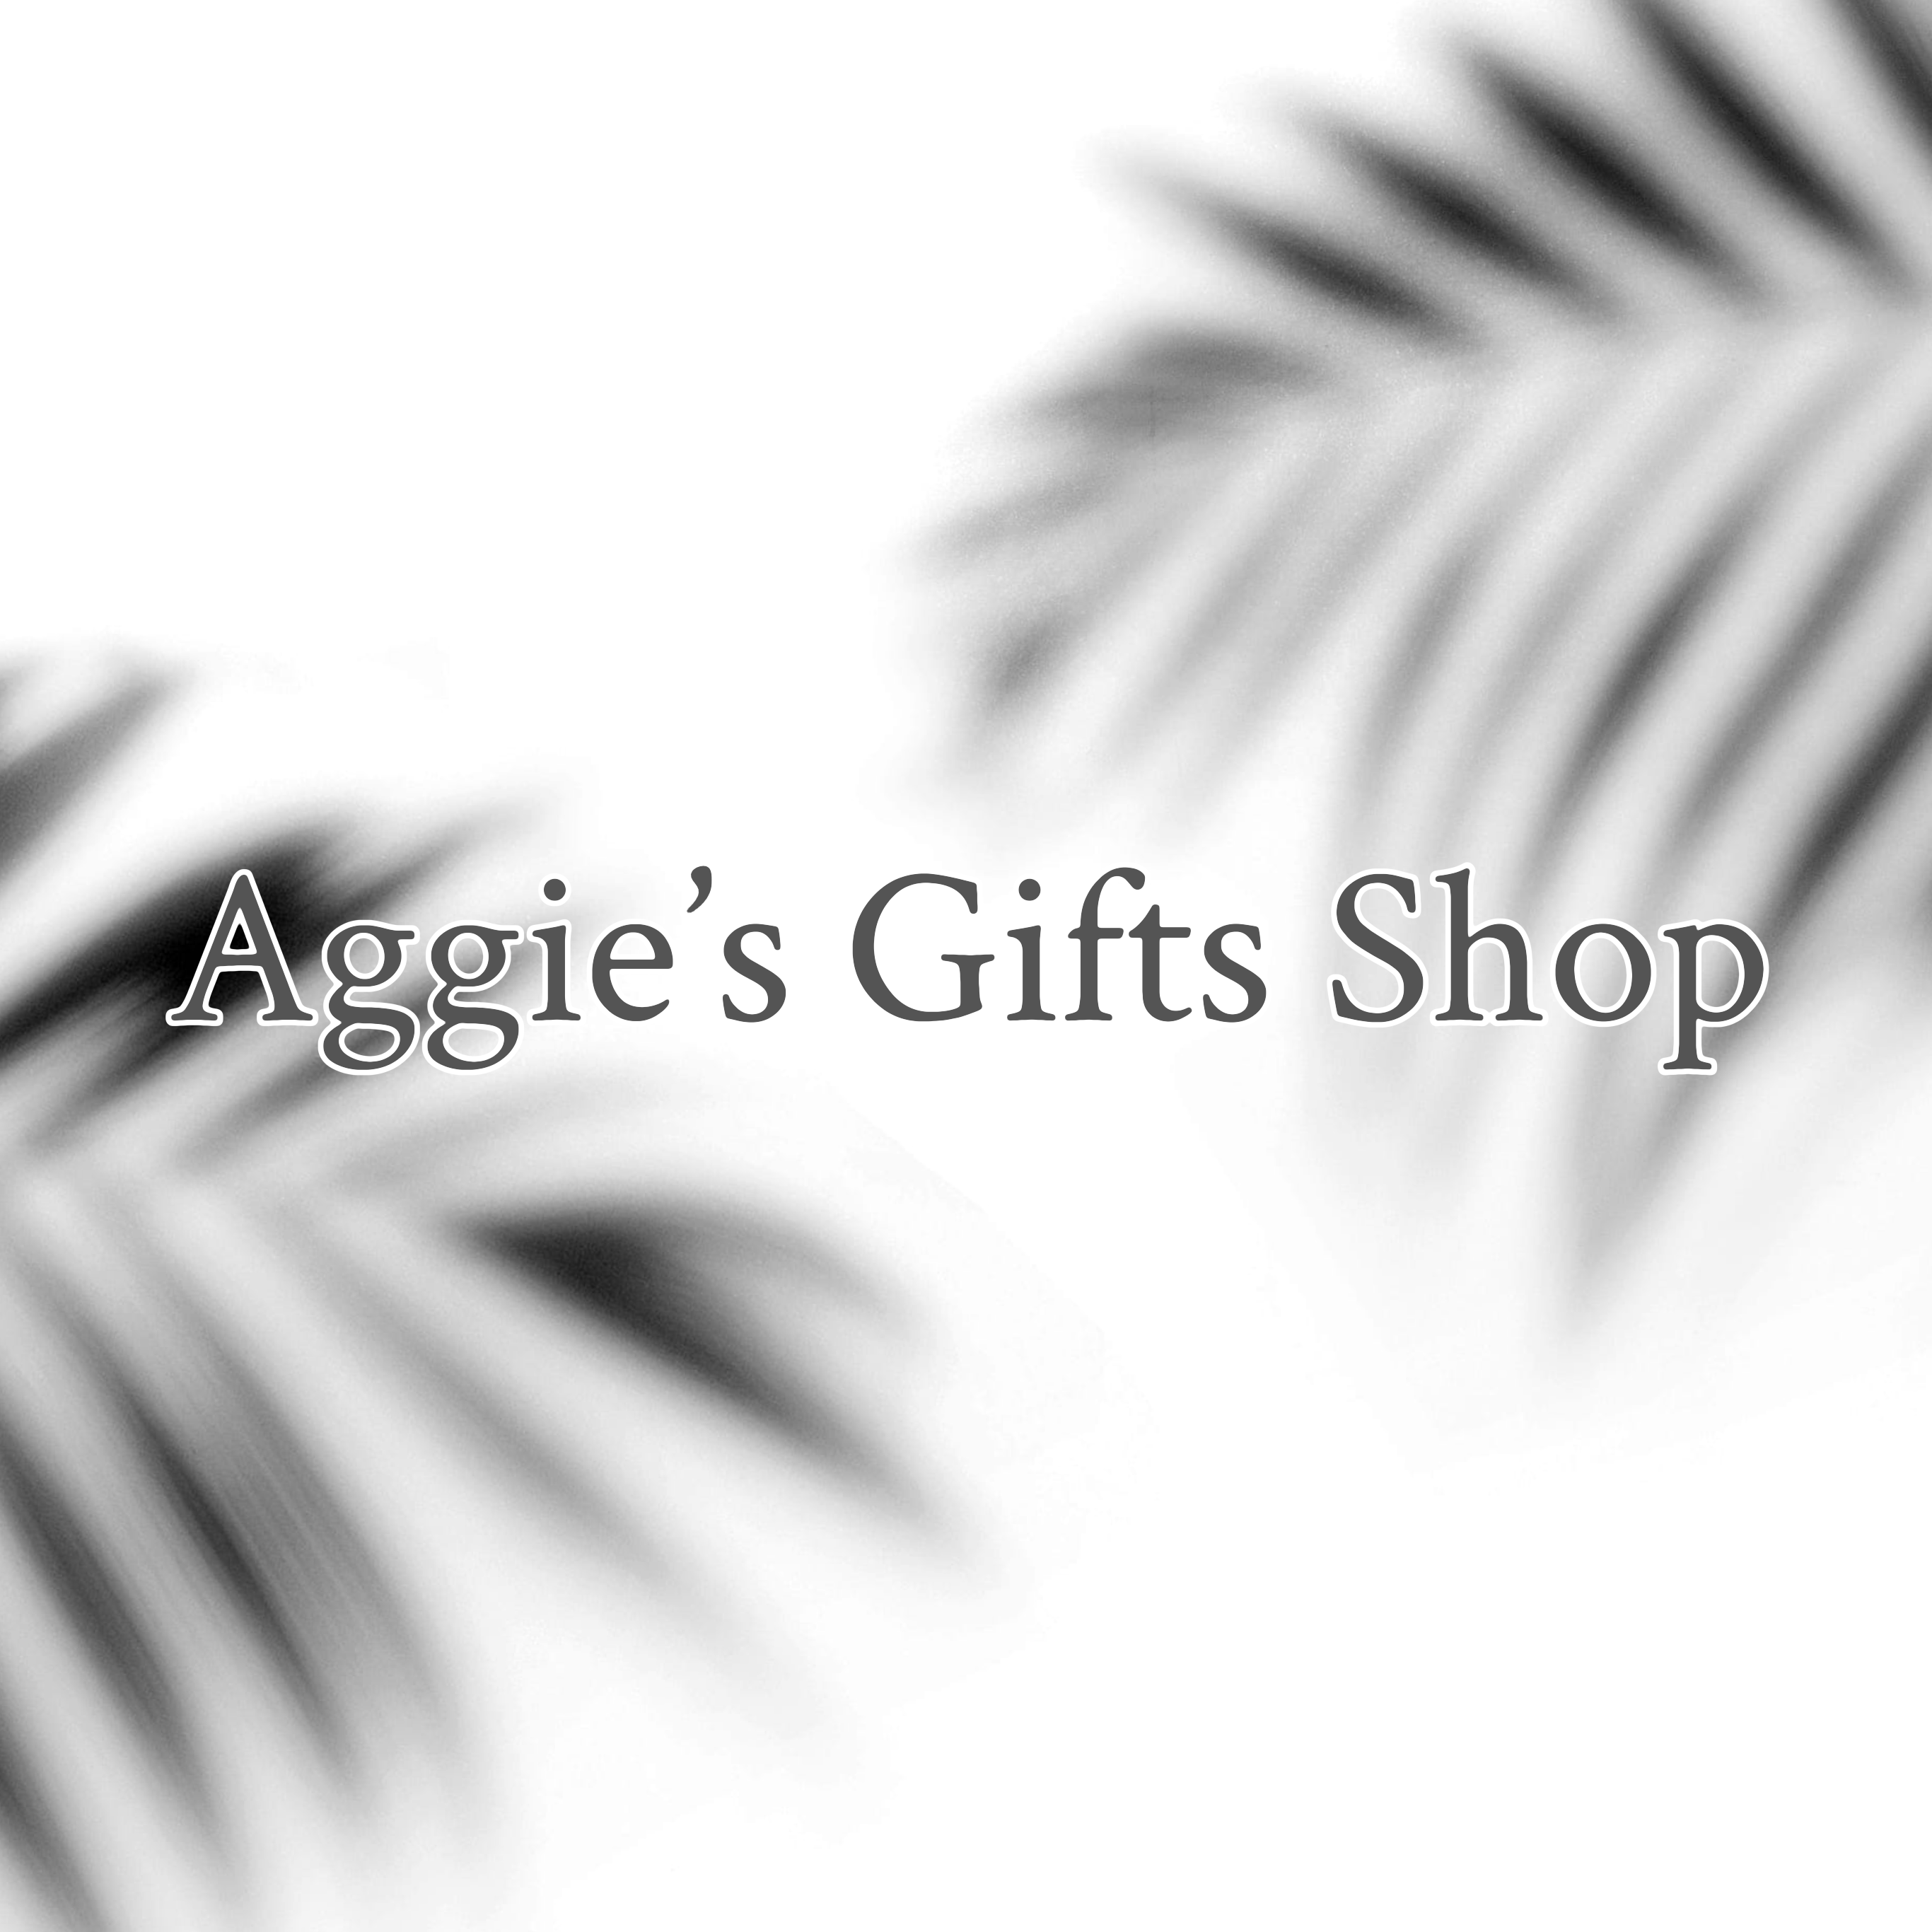 Aggies Gifts Shop